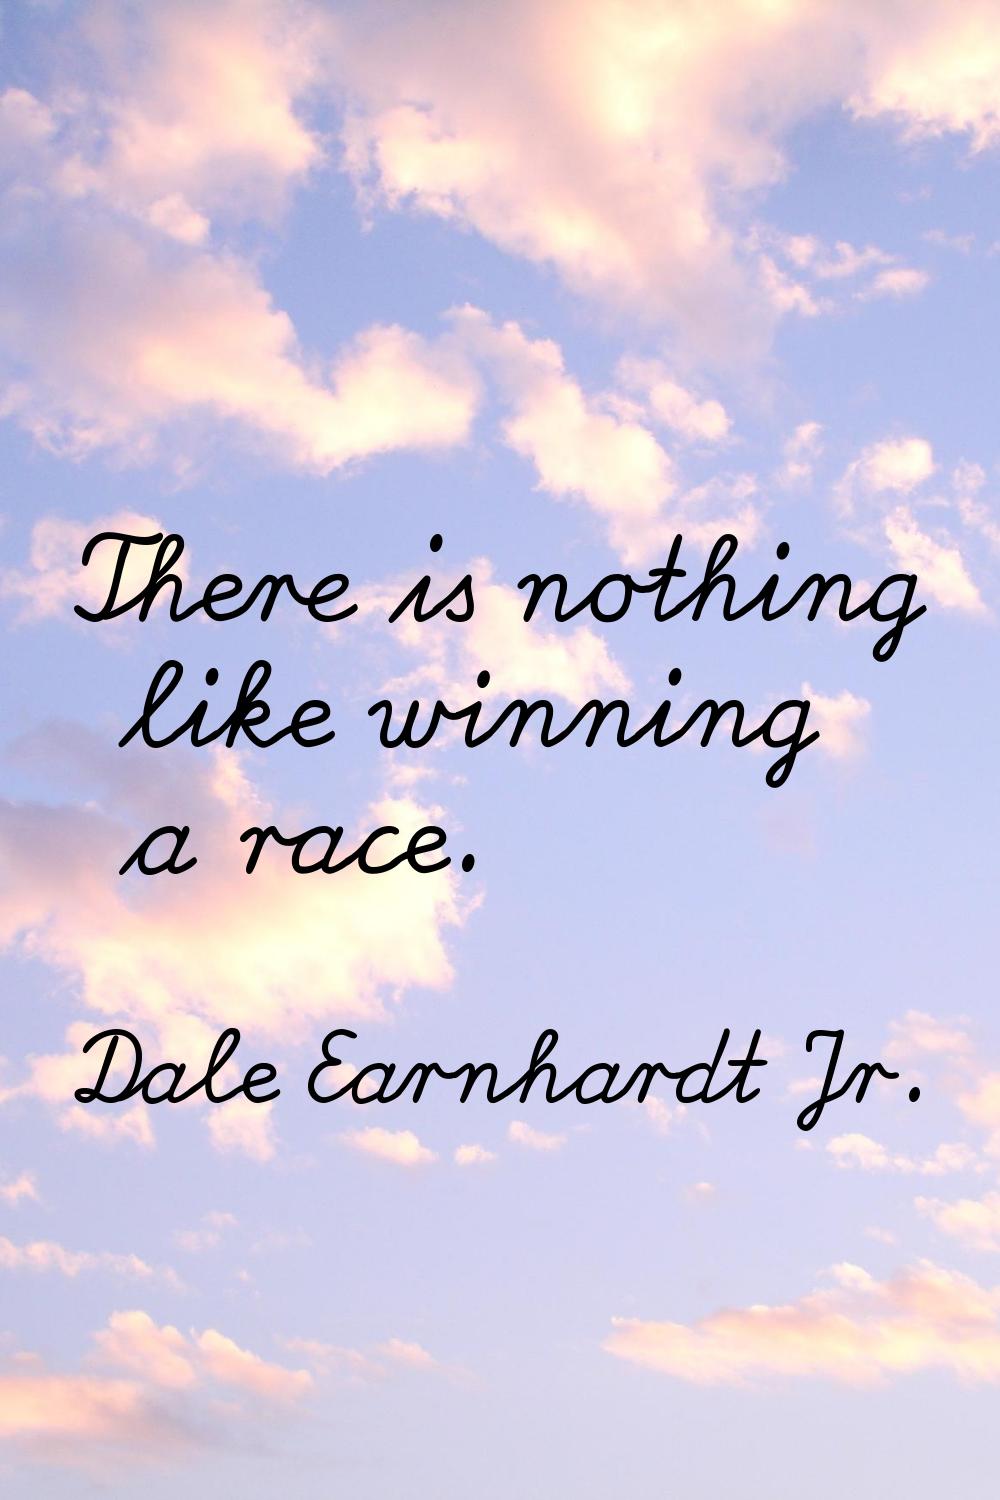 There is nothing like winning a race.